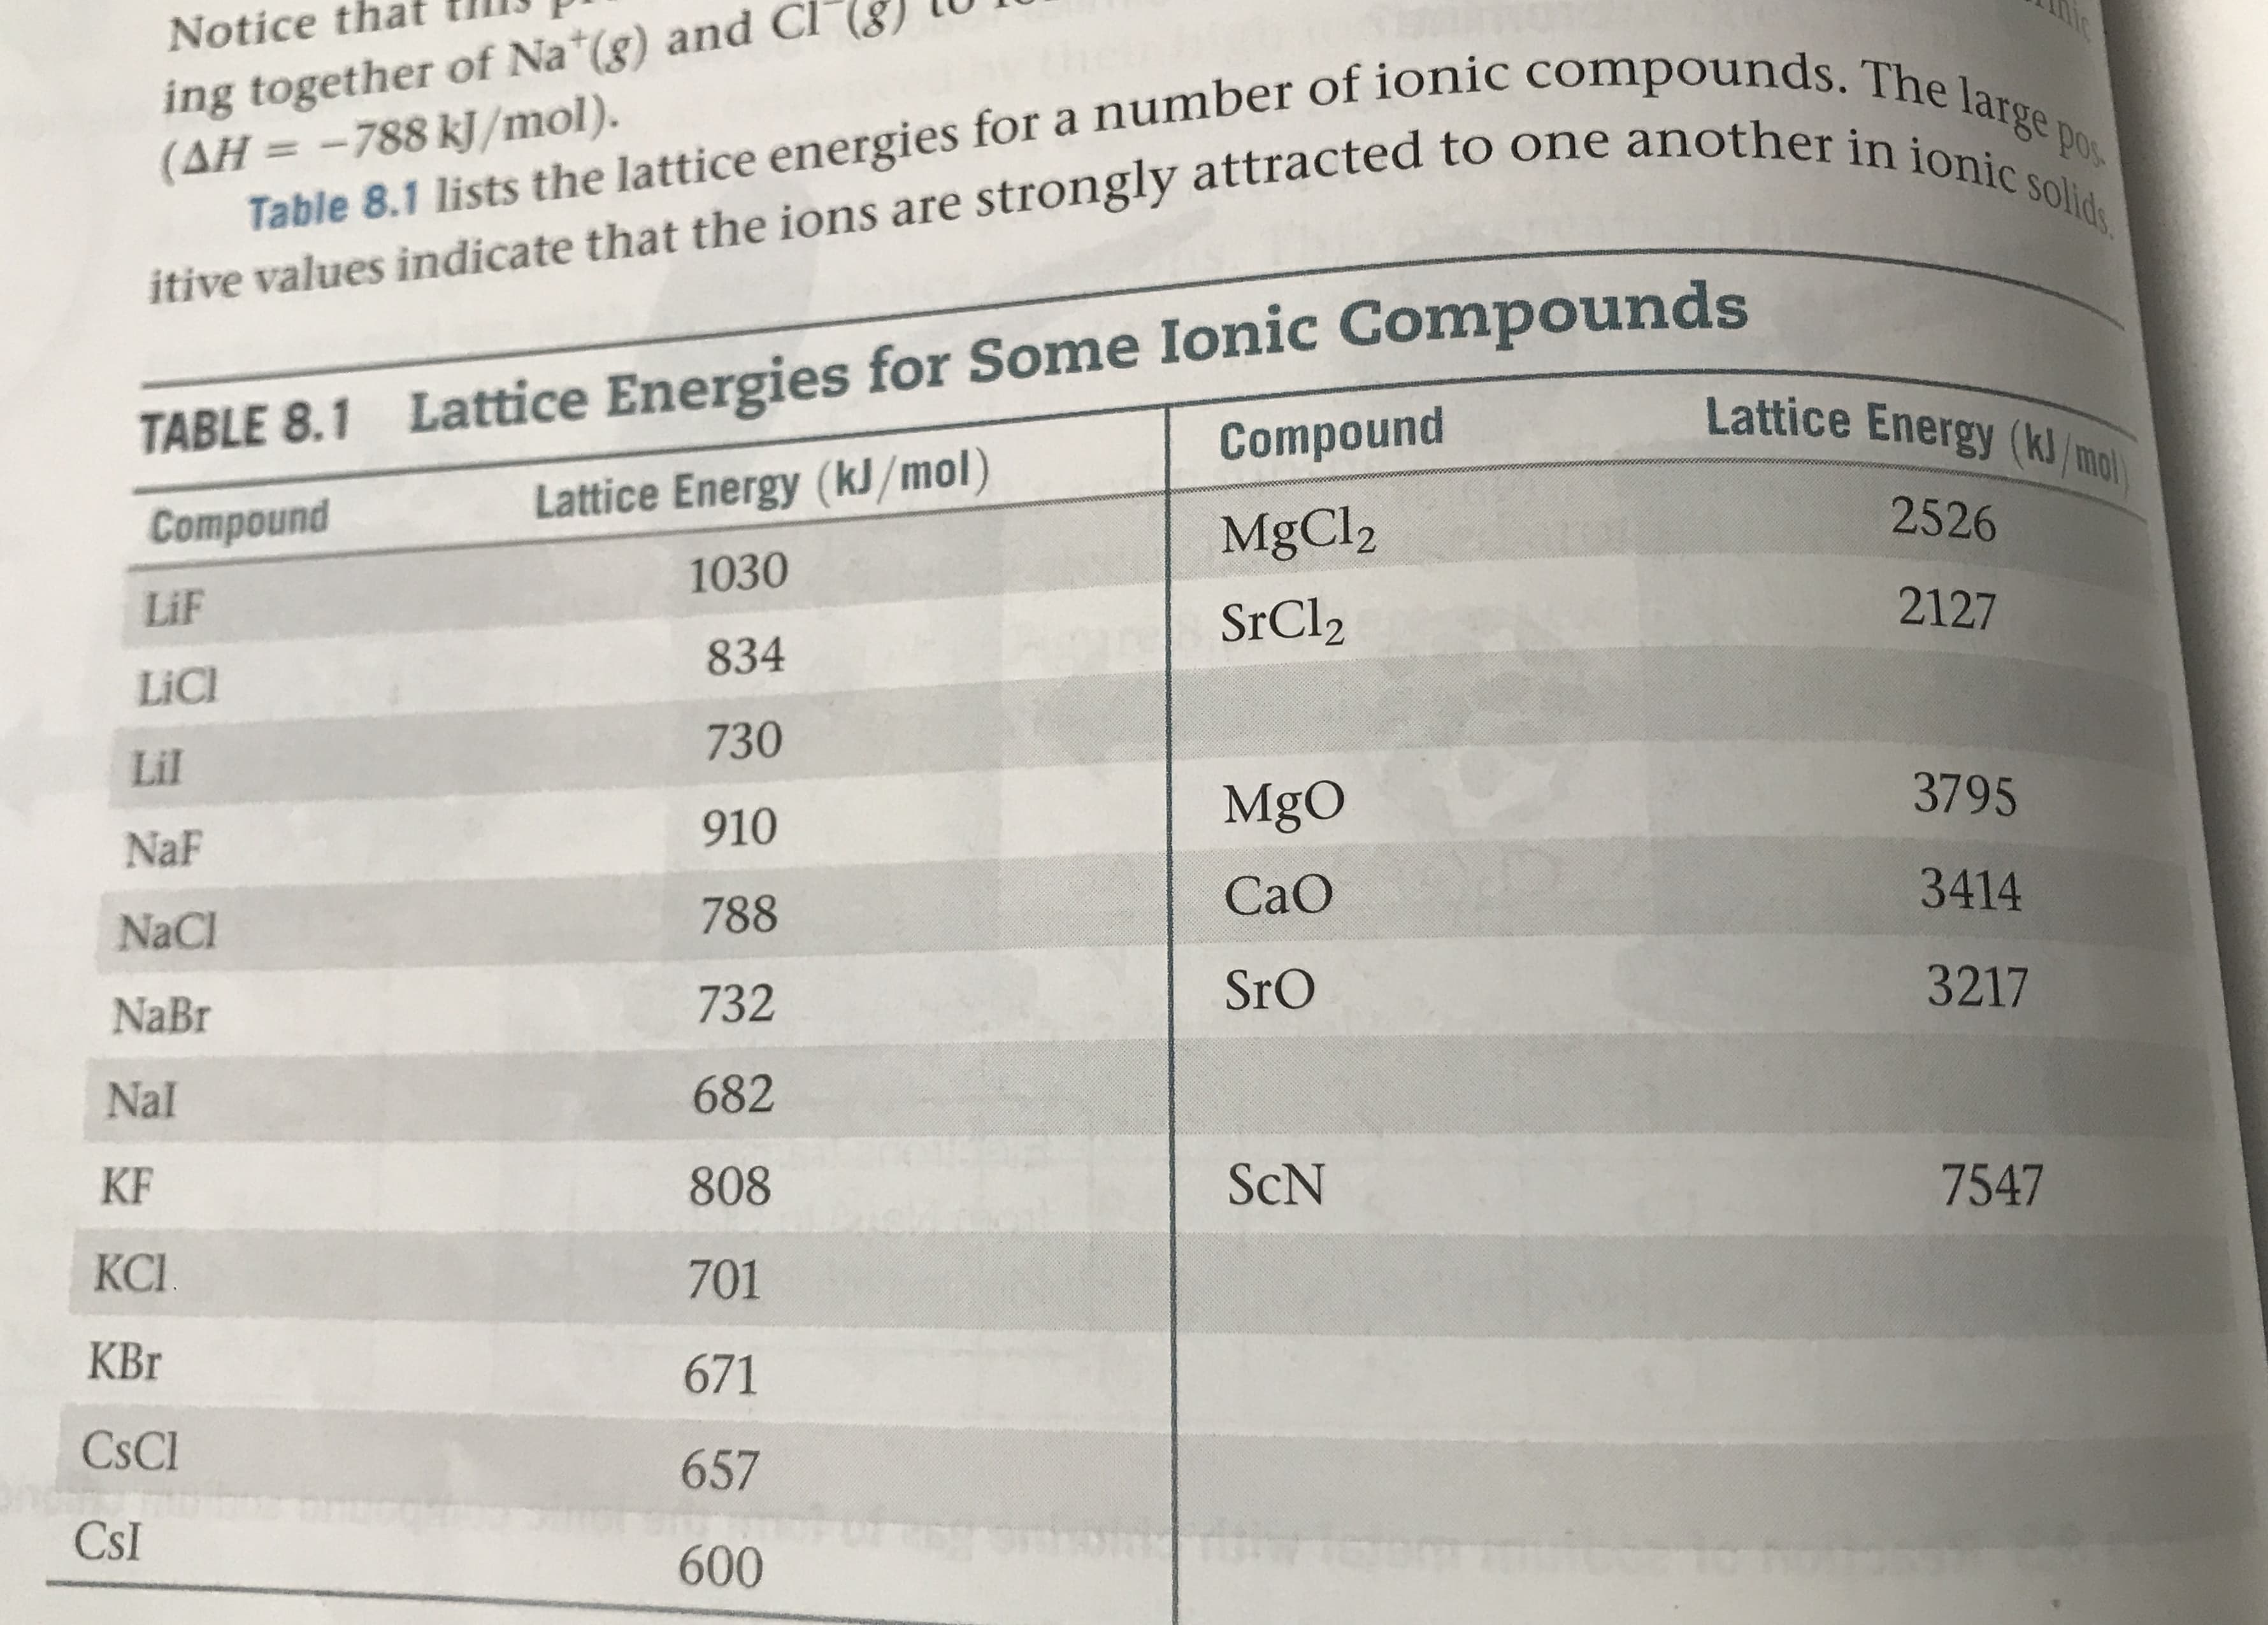 ing together of Na (g) and Cl
(AH=-788 kJ/mol).
Notice
Table 8.1 lists the lattice energies for a number of ionic compounds. The large
itive values indicate that the ions are strongly attracted to one another in ionic solid
Pos
TABLE 8.1 Lattice Energies for Some Ionic Compounds
Lattice Energy (kJ/mol)
Lattice Energy (kJ/mo
Compound
2526
Compound
MgCl2
1030
2127
LiF
SrCl2
834
LiCl
730
Lil
3795
MgO
910
NaF
3414
CaO
788
NaCl
3217
SrO
732
NaBr
682
Nal
ScN
7547
KF
808
КС.
701
KBr
671
CsCl
657
CsI
600
